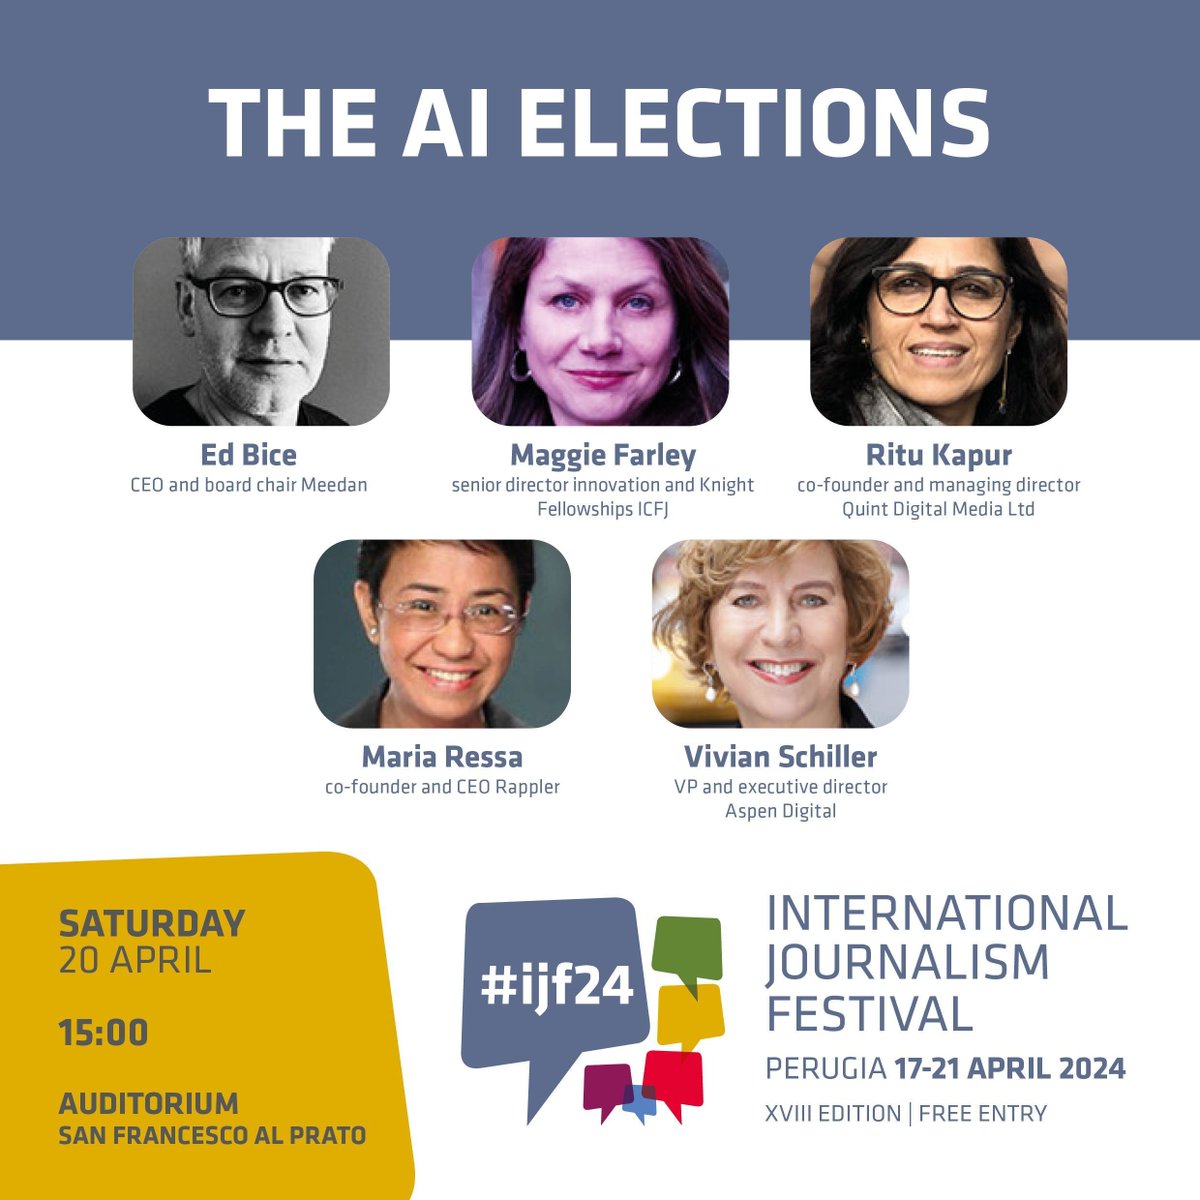 Generative AI advances and broad accessibility are reshaping sectors. How will they change the info ecosystem? How should news media respond? Don’t miss this #IJF24 session moderated by ICFJ's @Maggilista with @edbice @kapur_ritu @mariaressa @vivian buff.ly/4aXTvFW